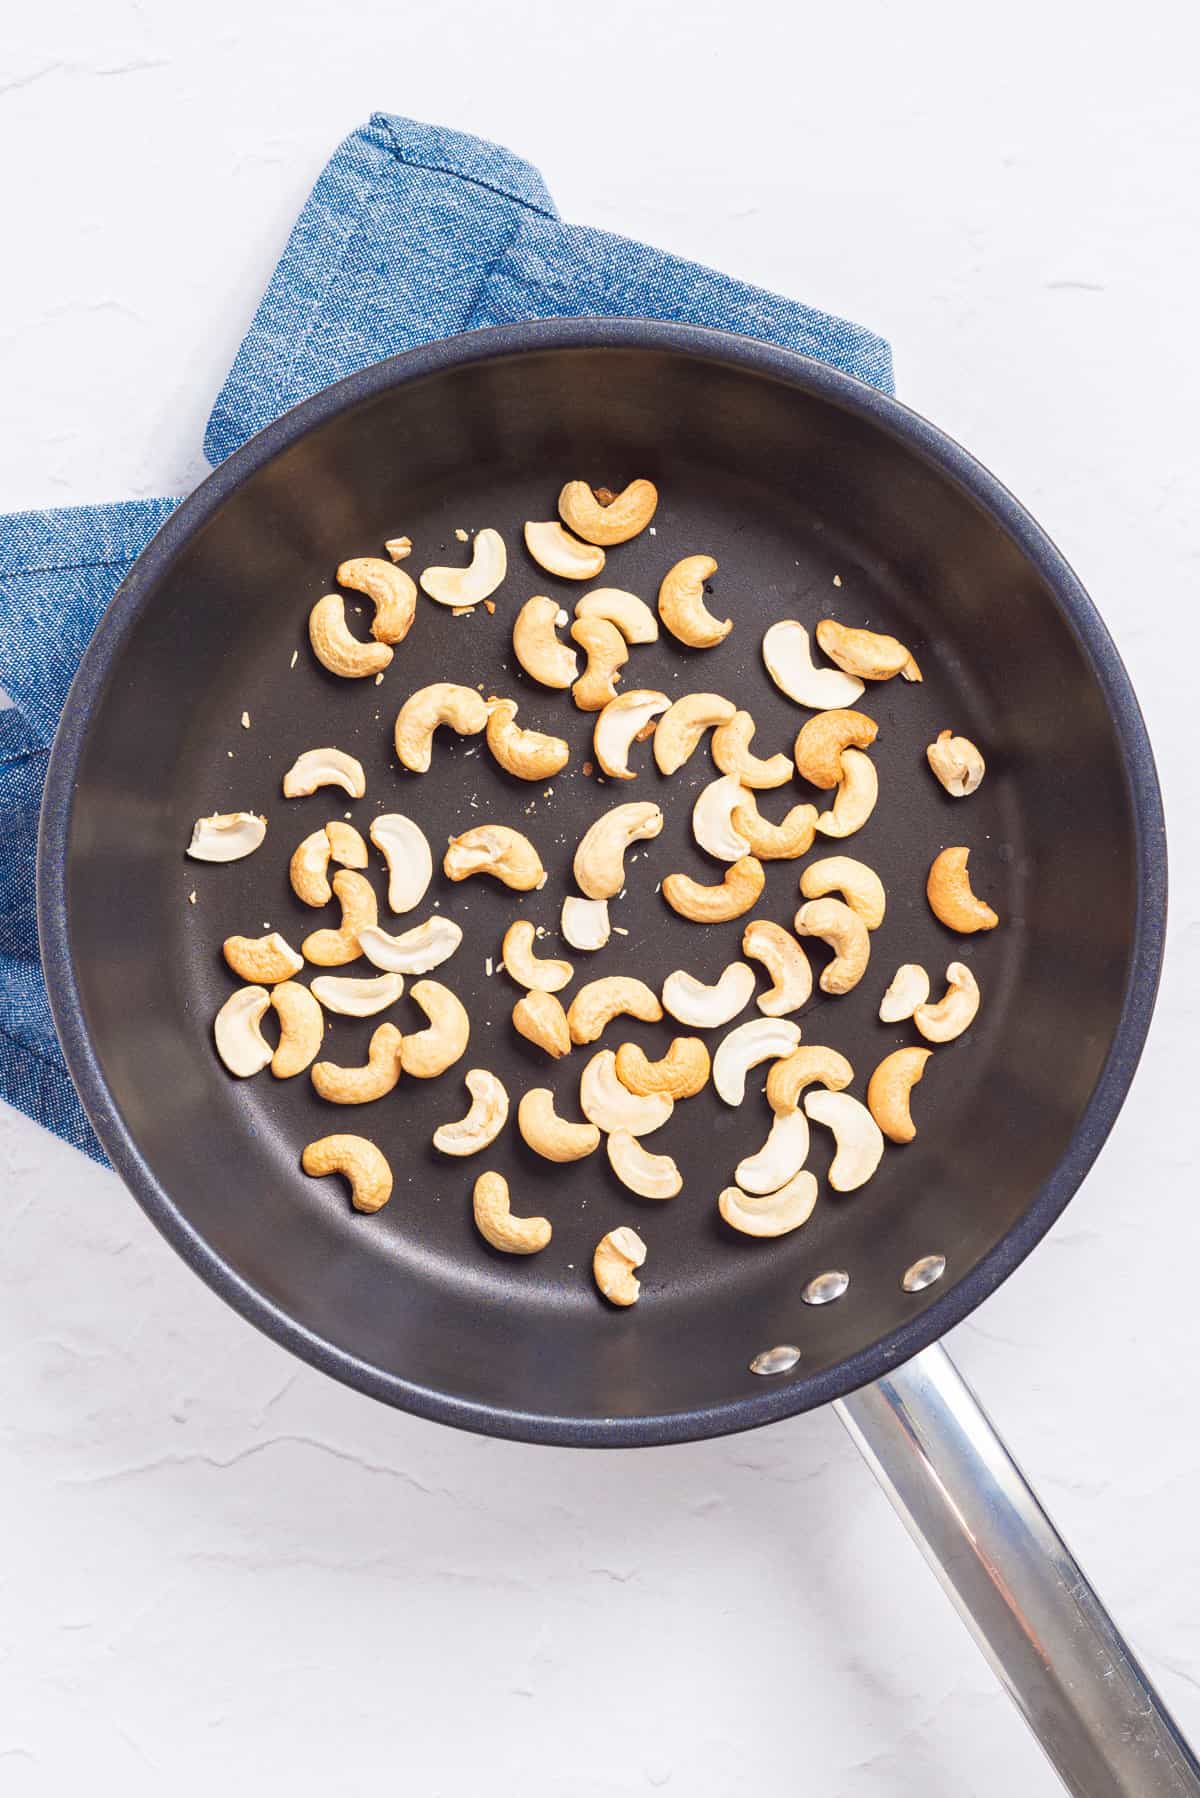 An image of sliced and toasted cashews in a pan